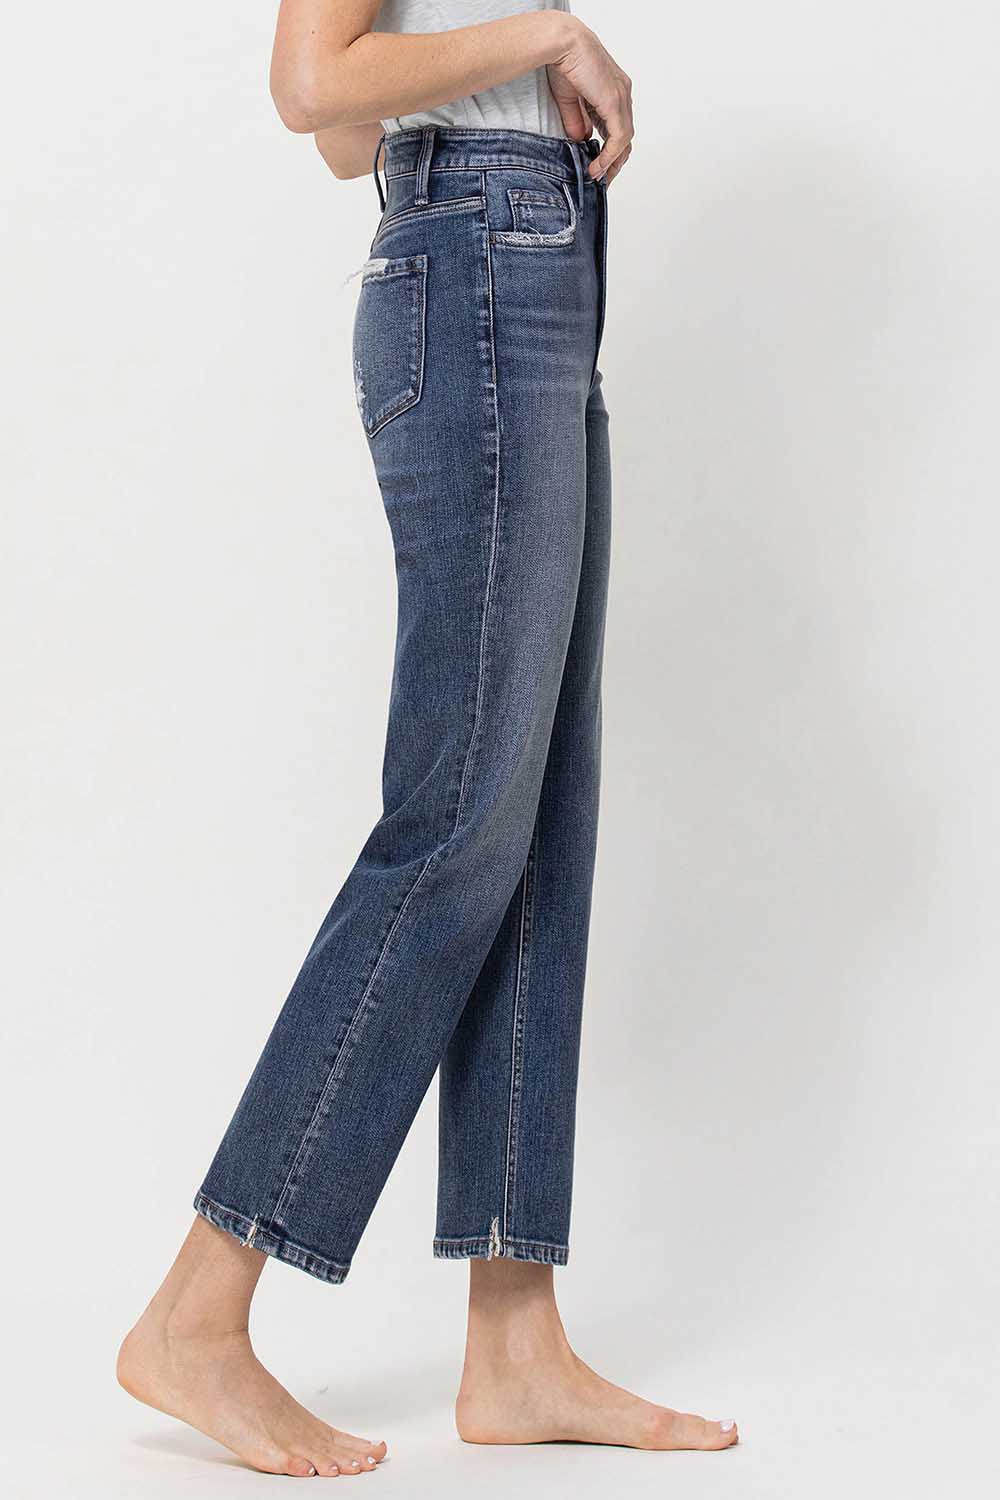 flying-monkey-jeans-high-rise-ankle-straight-jeans-02